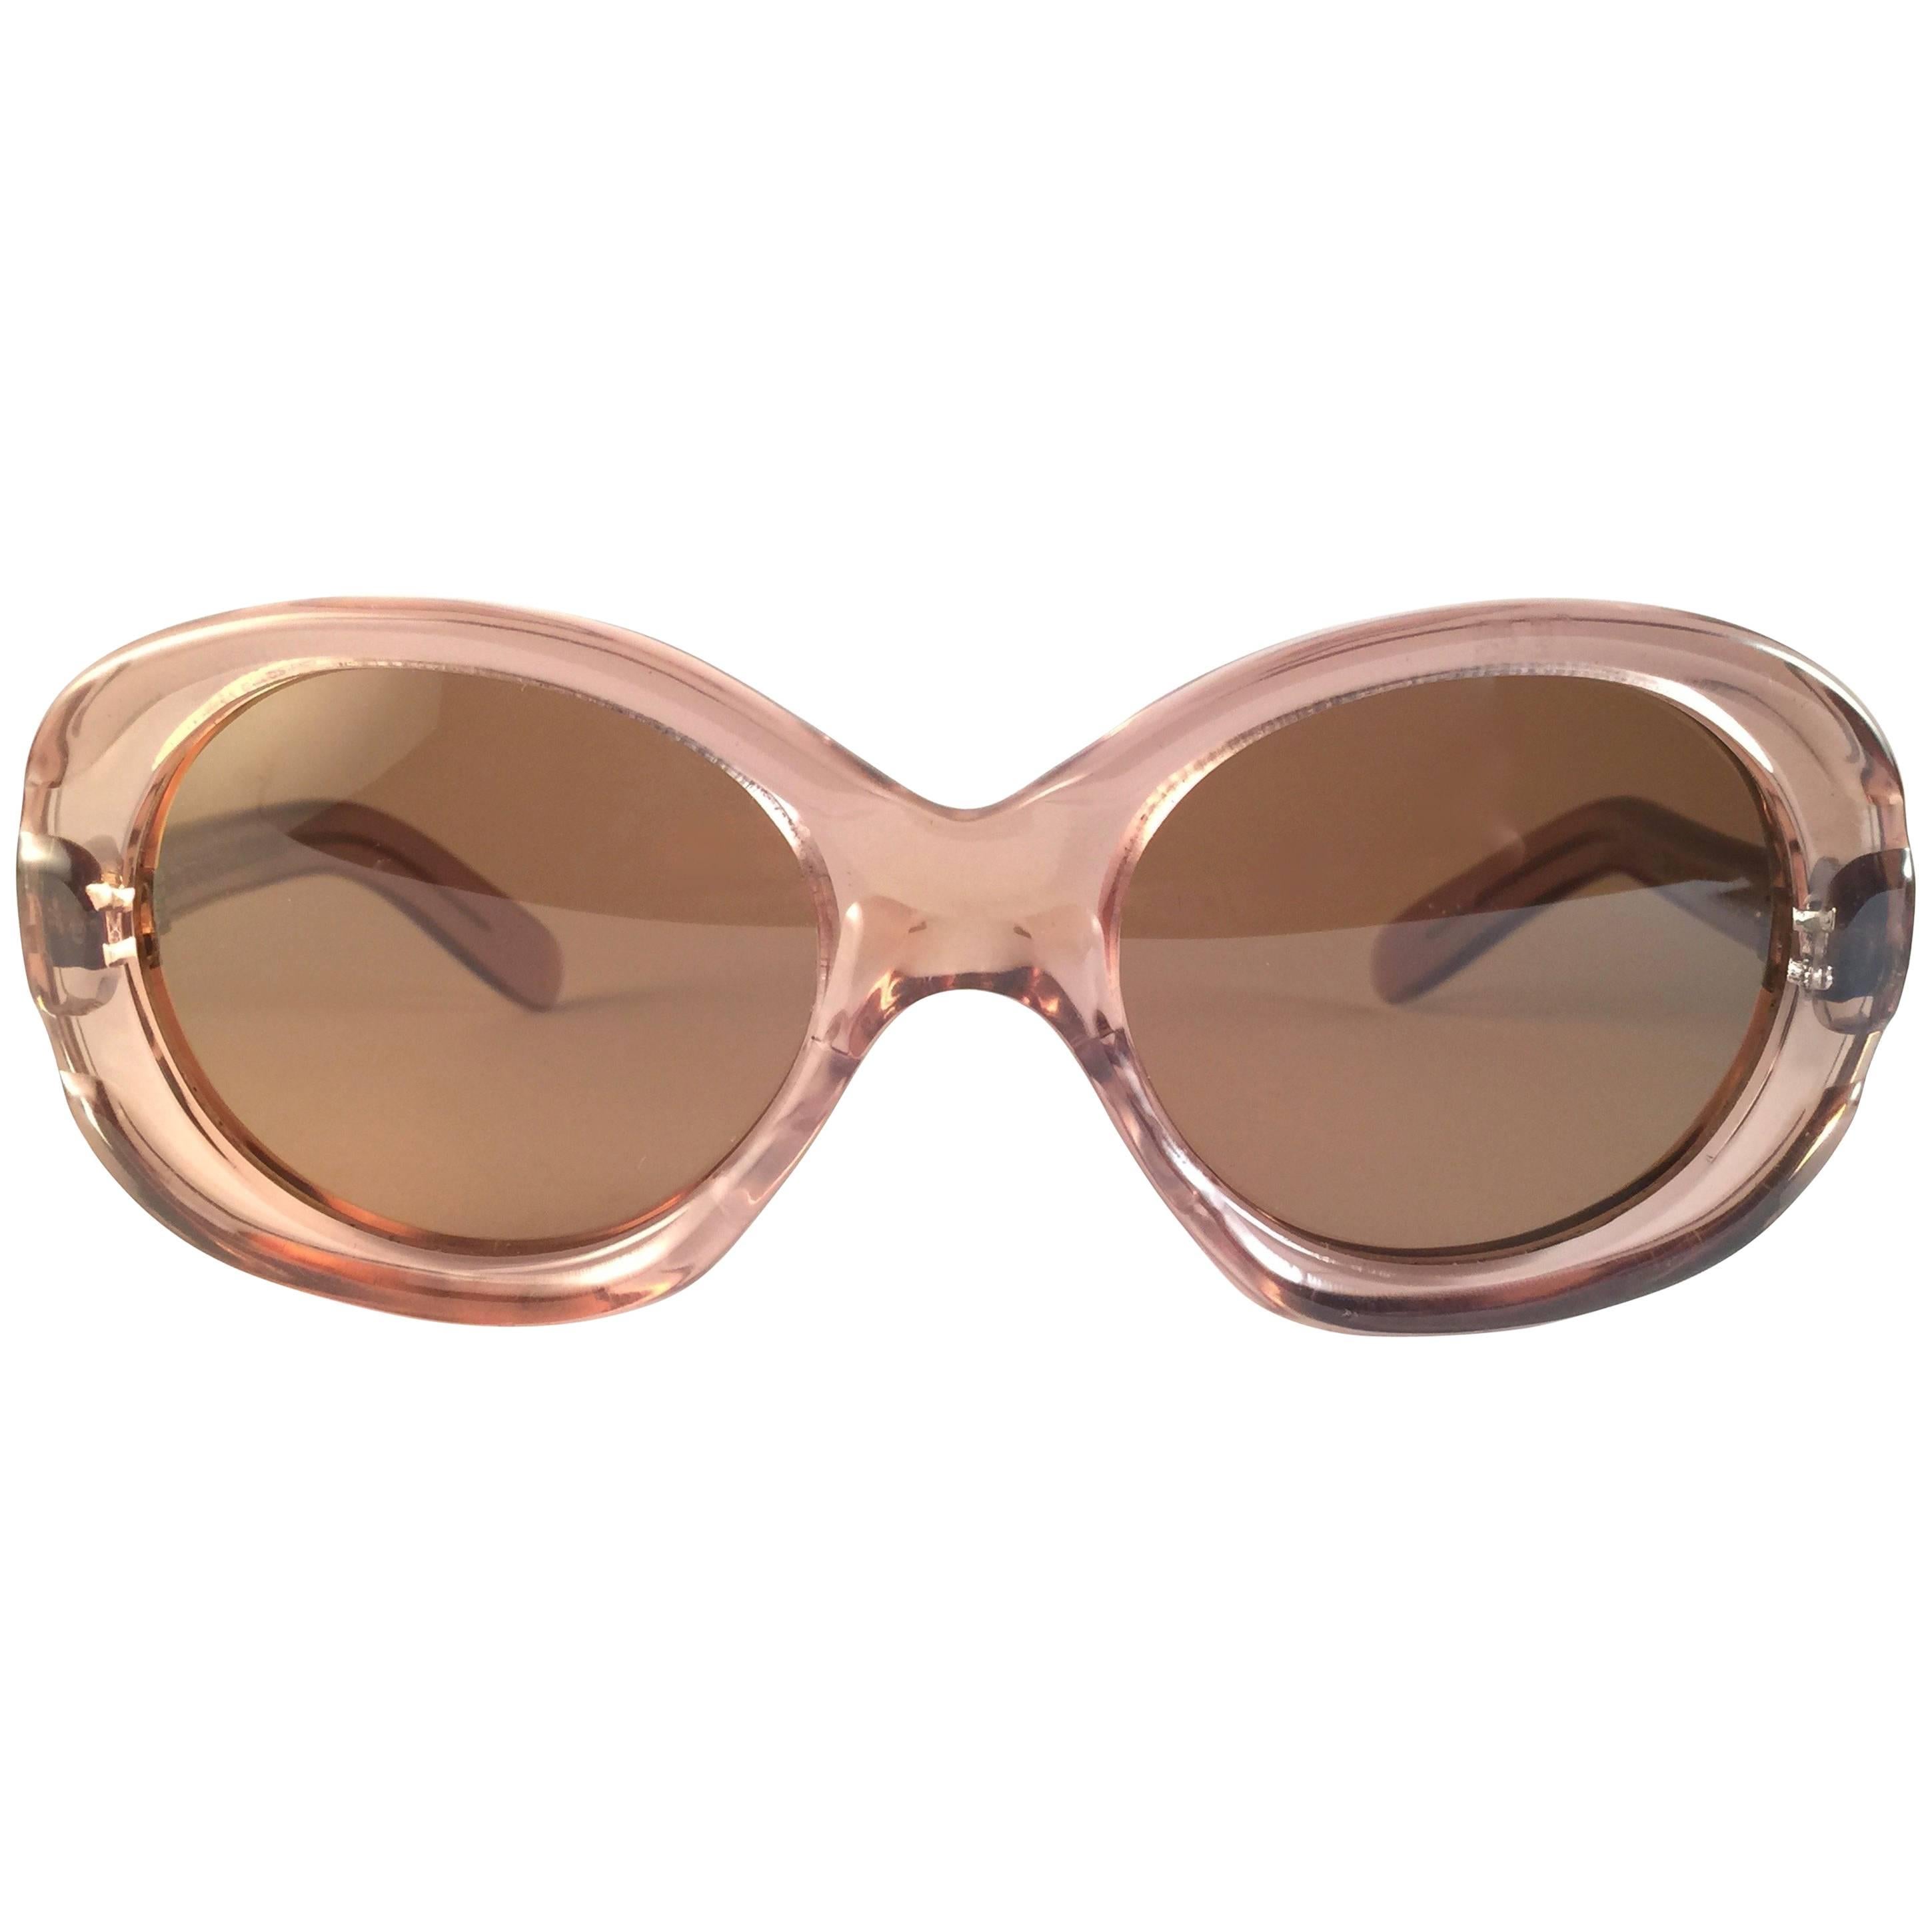 New Rare Vintage Philippe Chevallier Rose ClearOversized 1960's Sunglasses